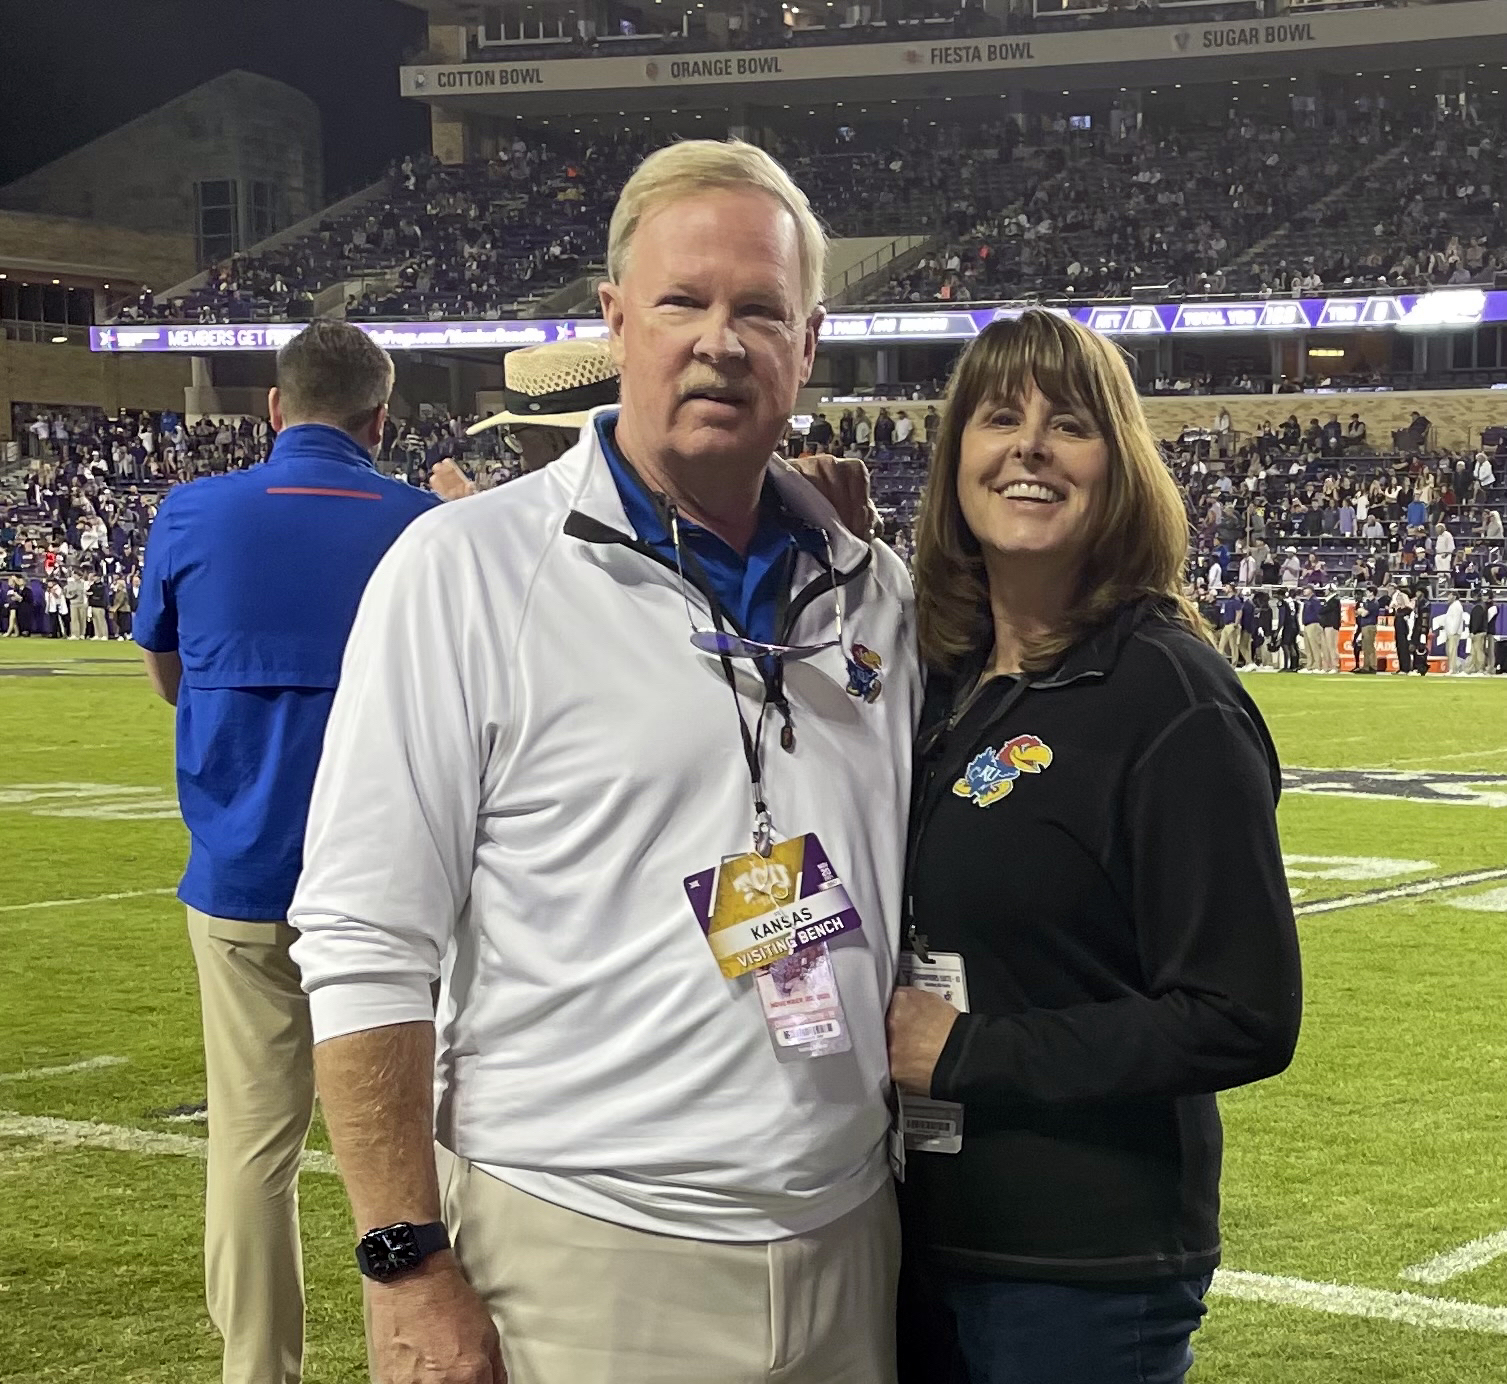 In addition to supporting the School of Pharmacy and School of Nursing, Kurtis and Sally Klein enjoy attending KU sporting events.